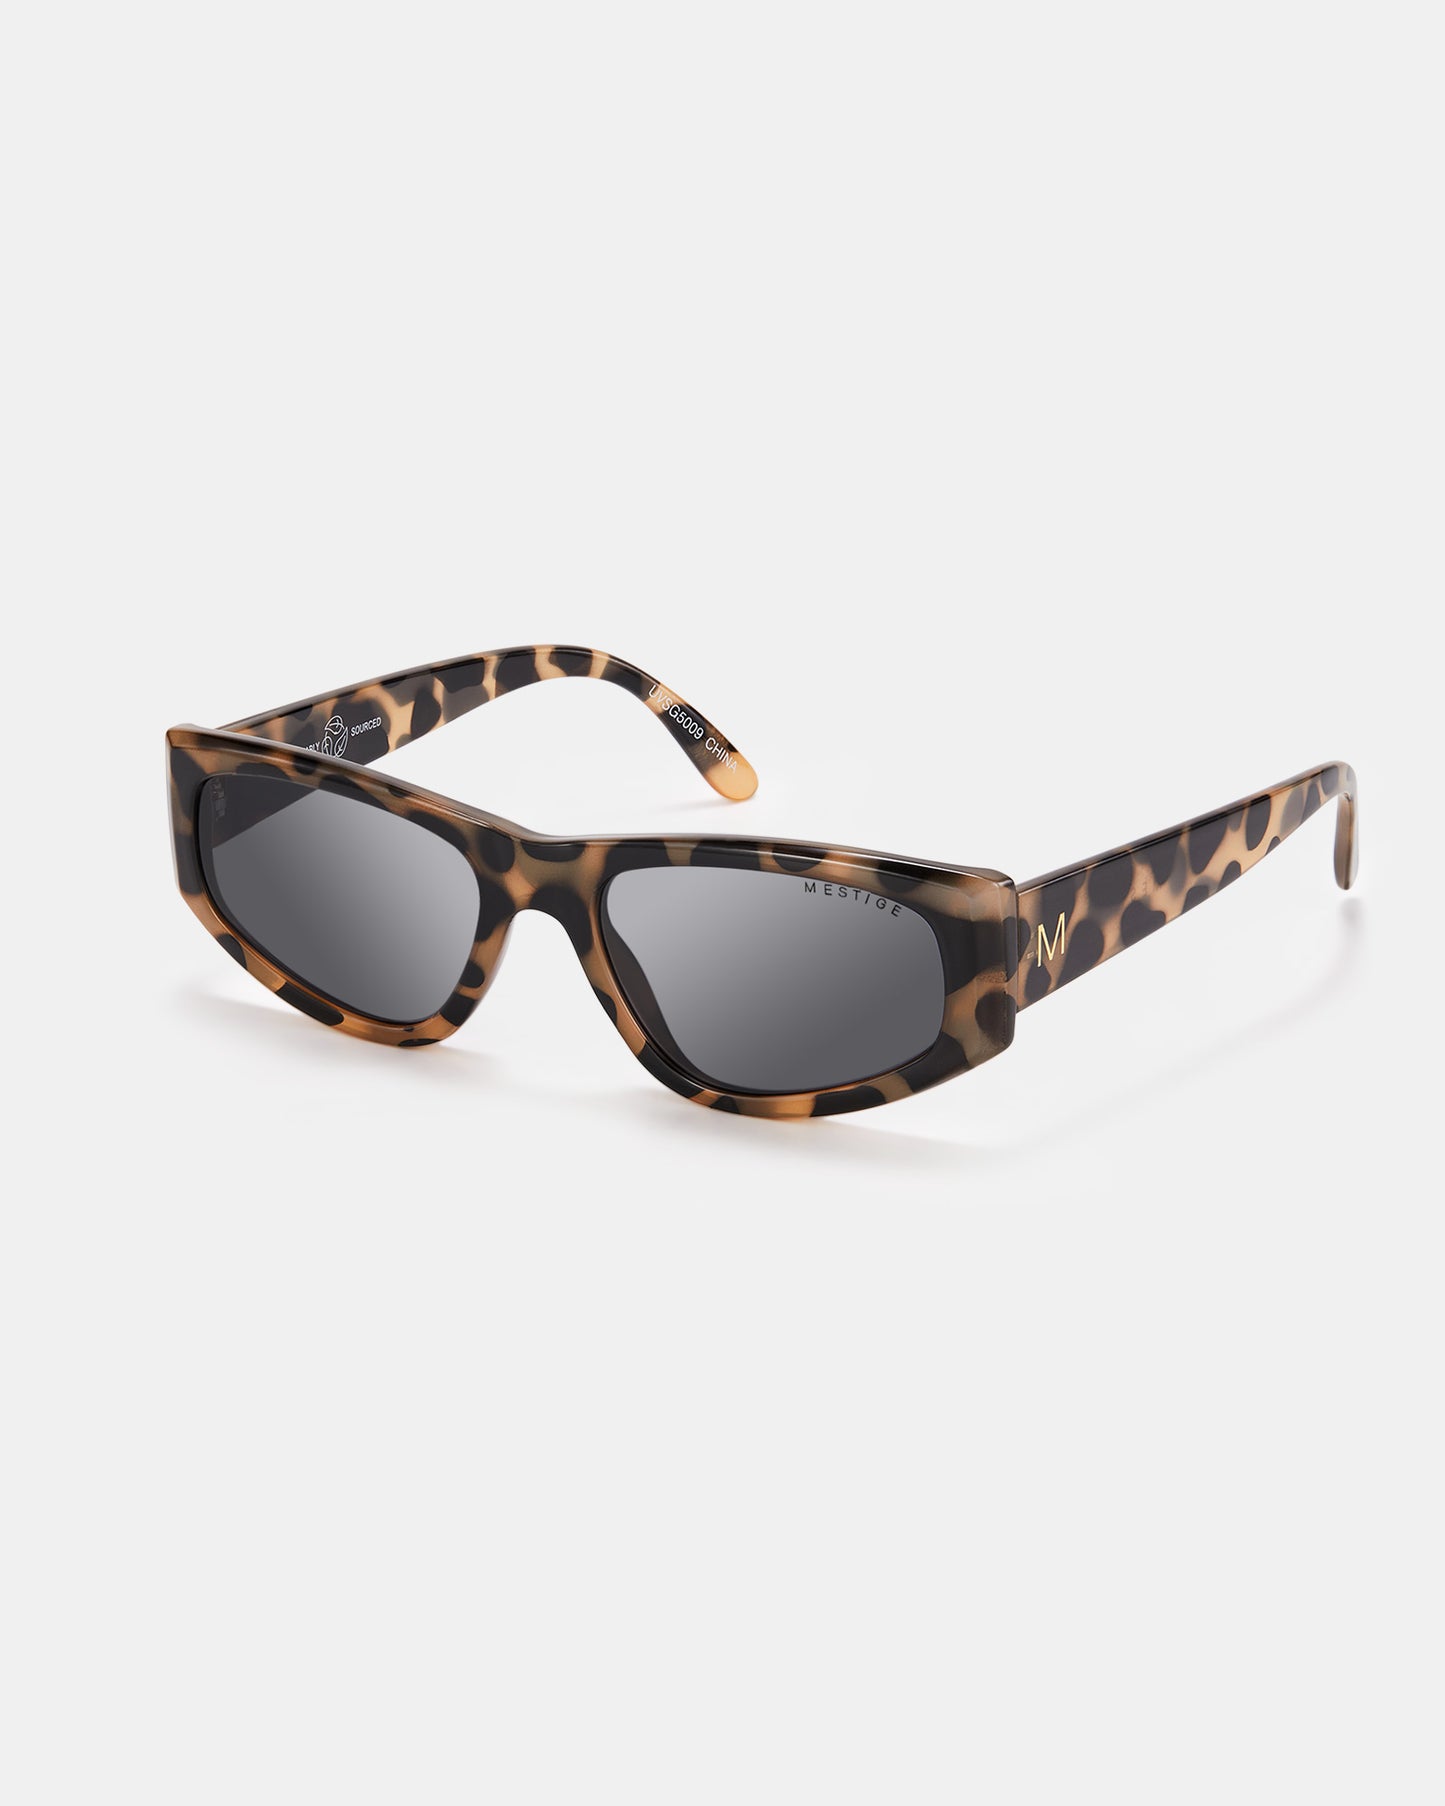 Terra in Leopard with Sustainable Materials